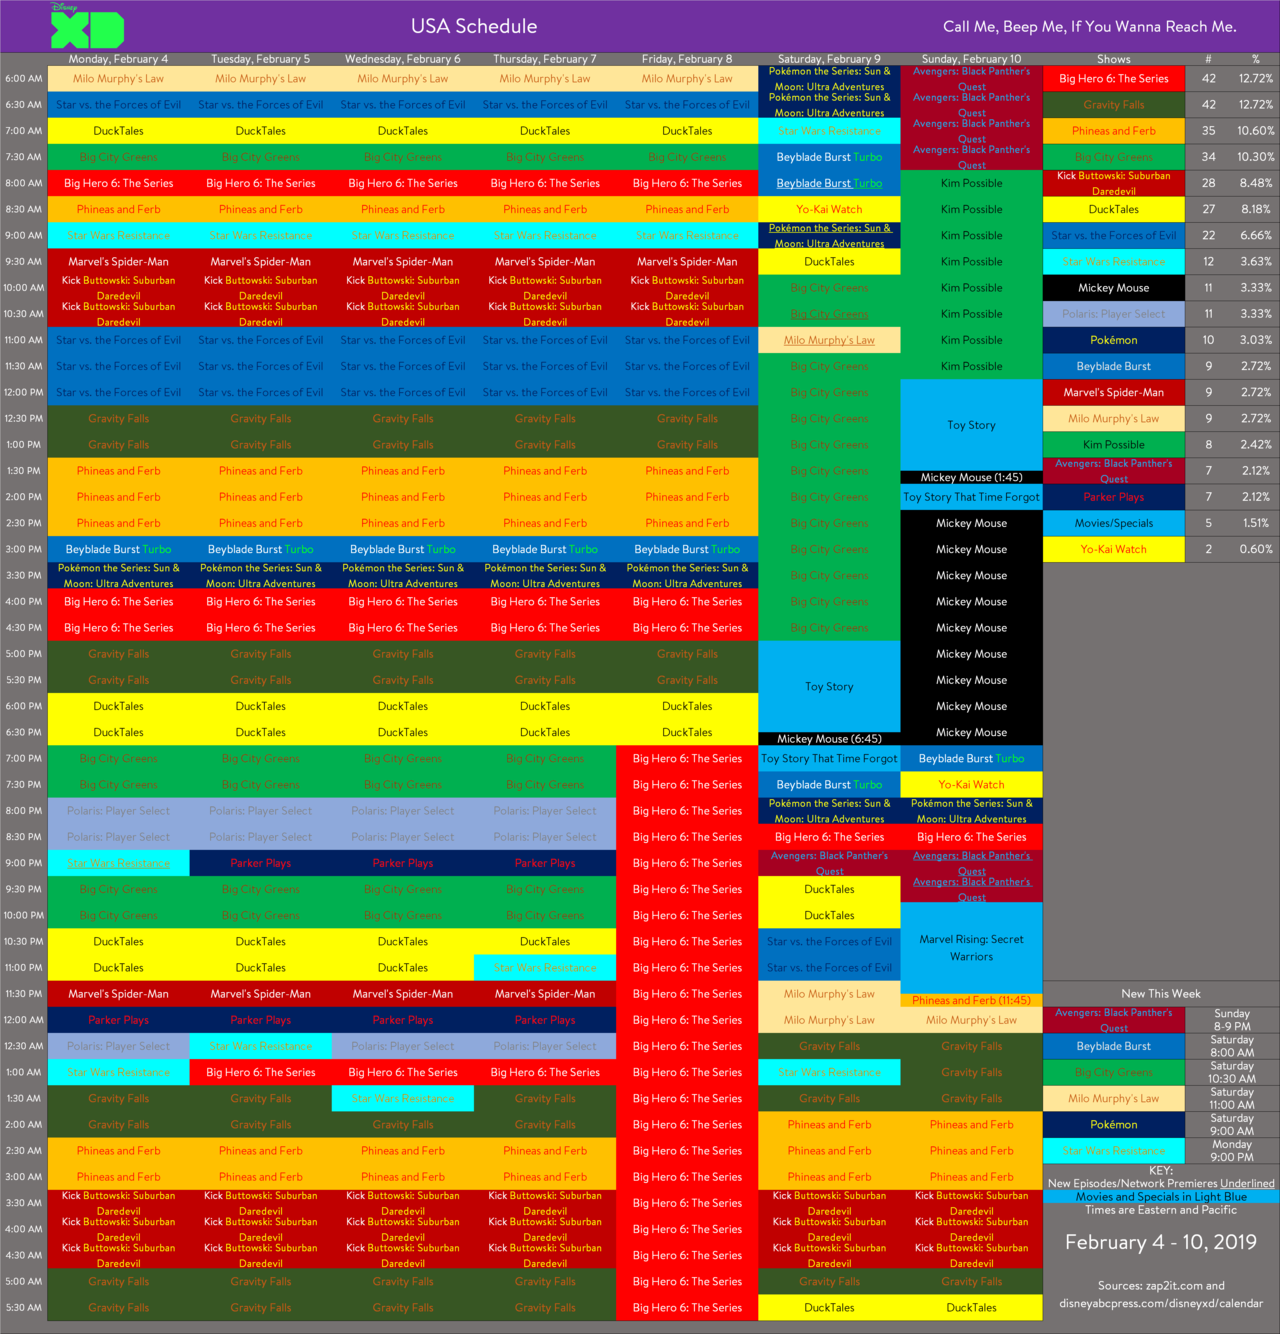 Disney Schedule Thread and Archive — Here’s Disney XD’s Schedule for